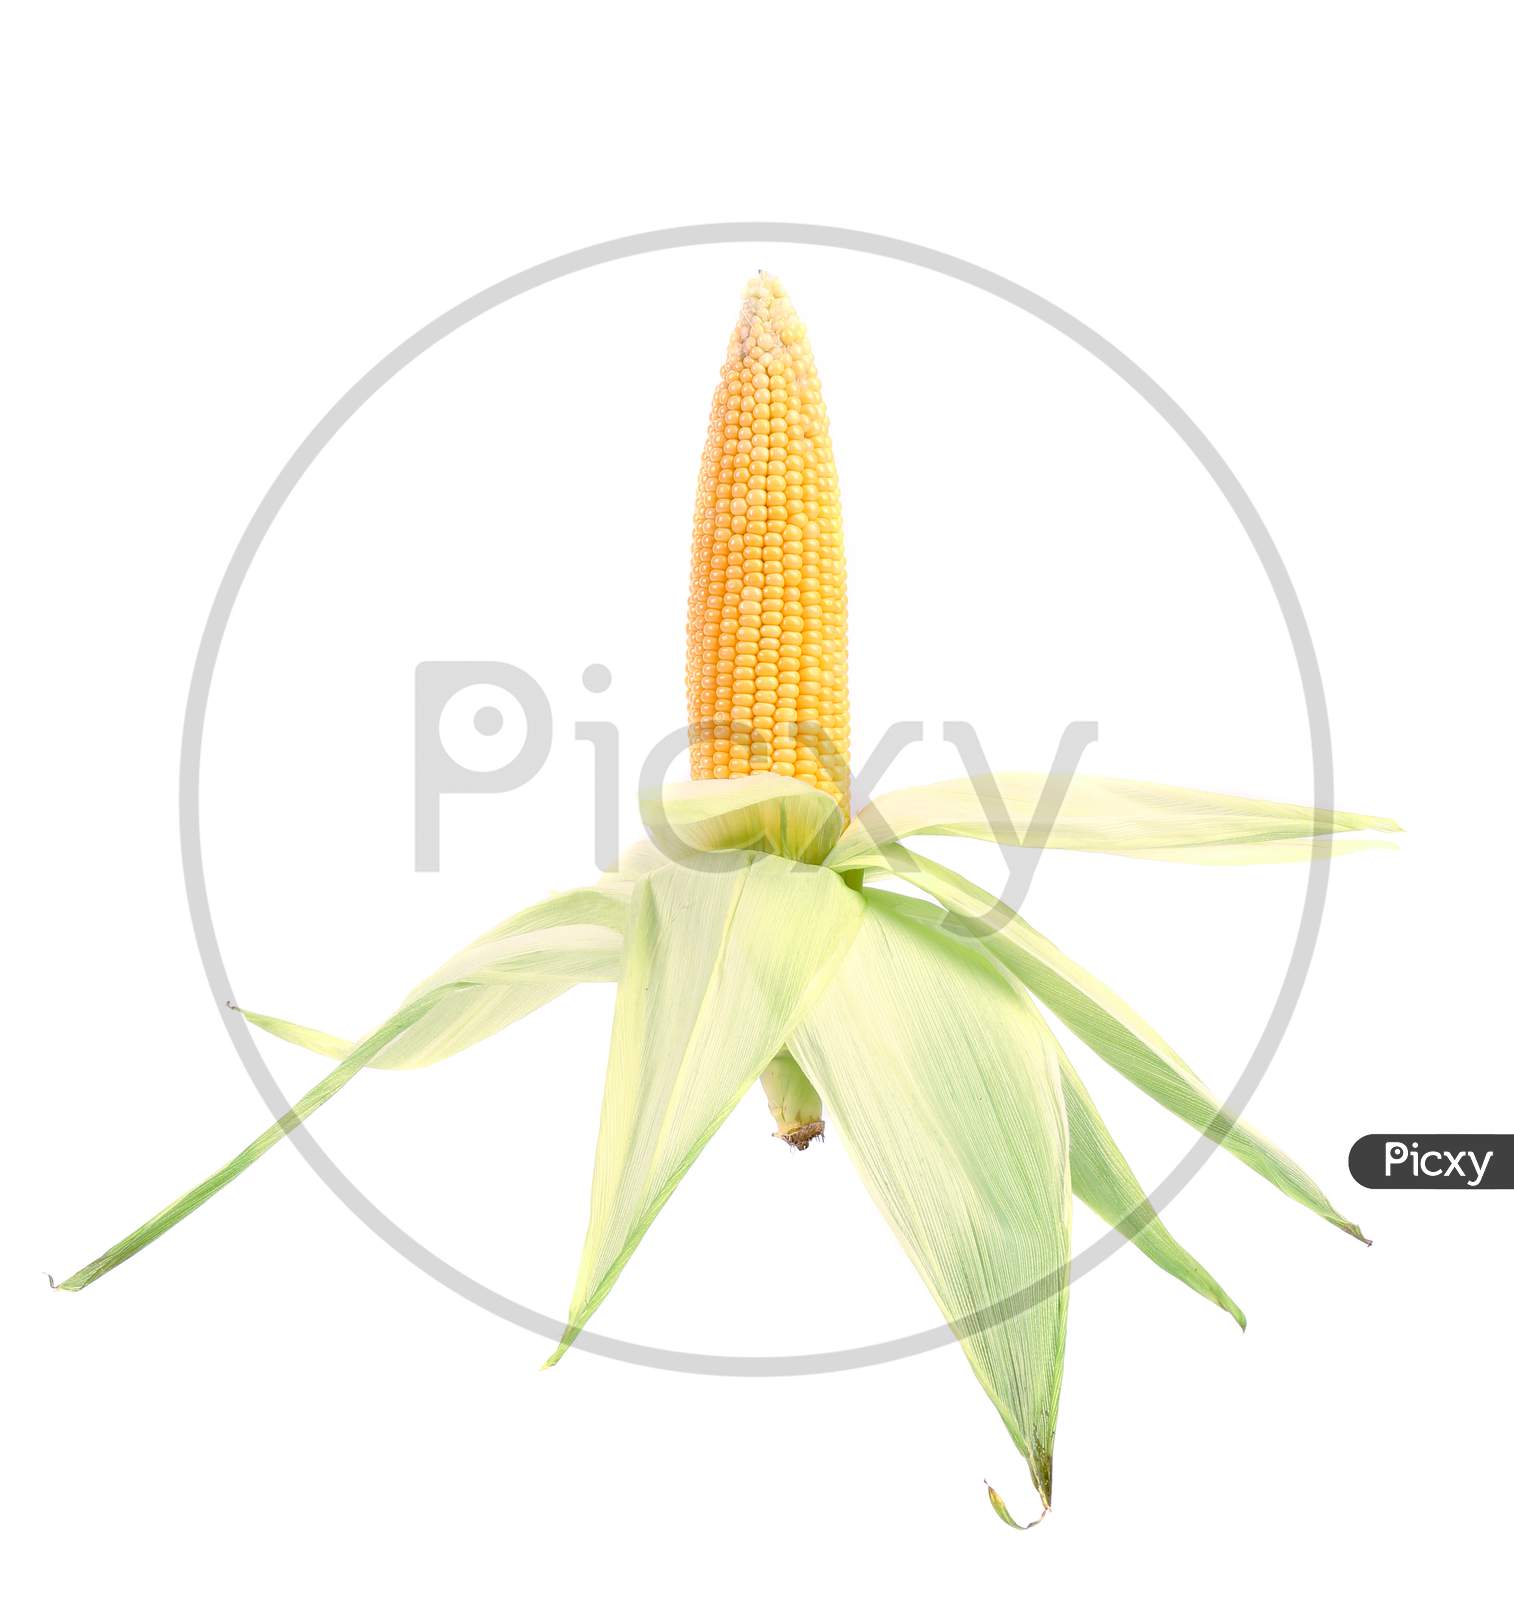 Fresh Corn Cop In Form Of Rocket. Isolated On A White Background.